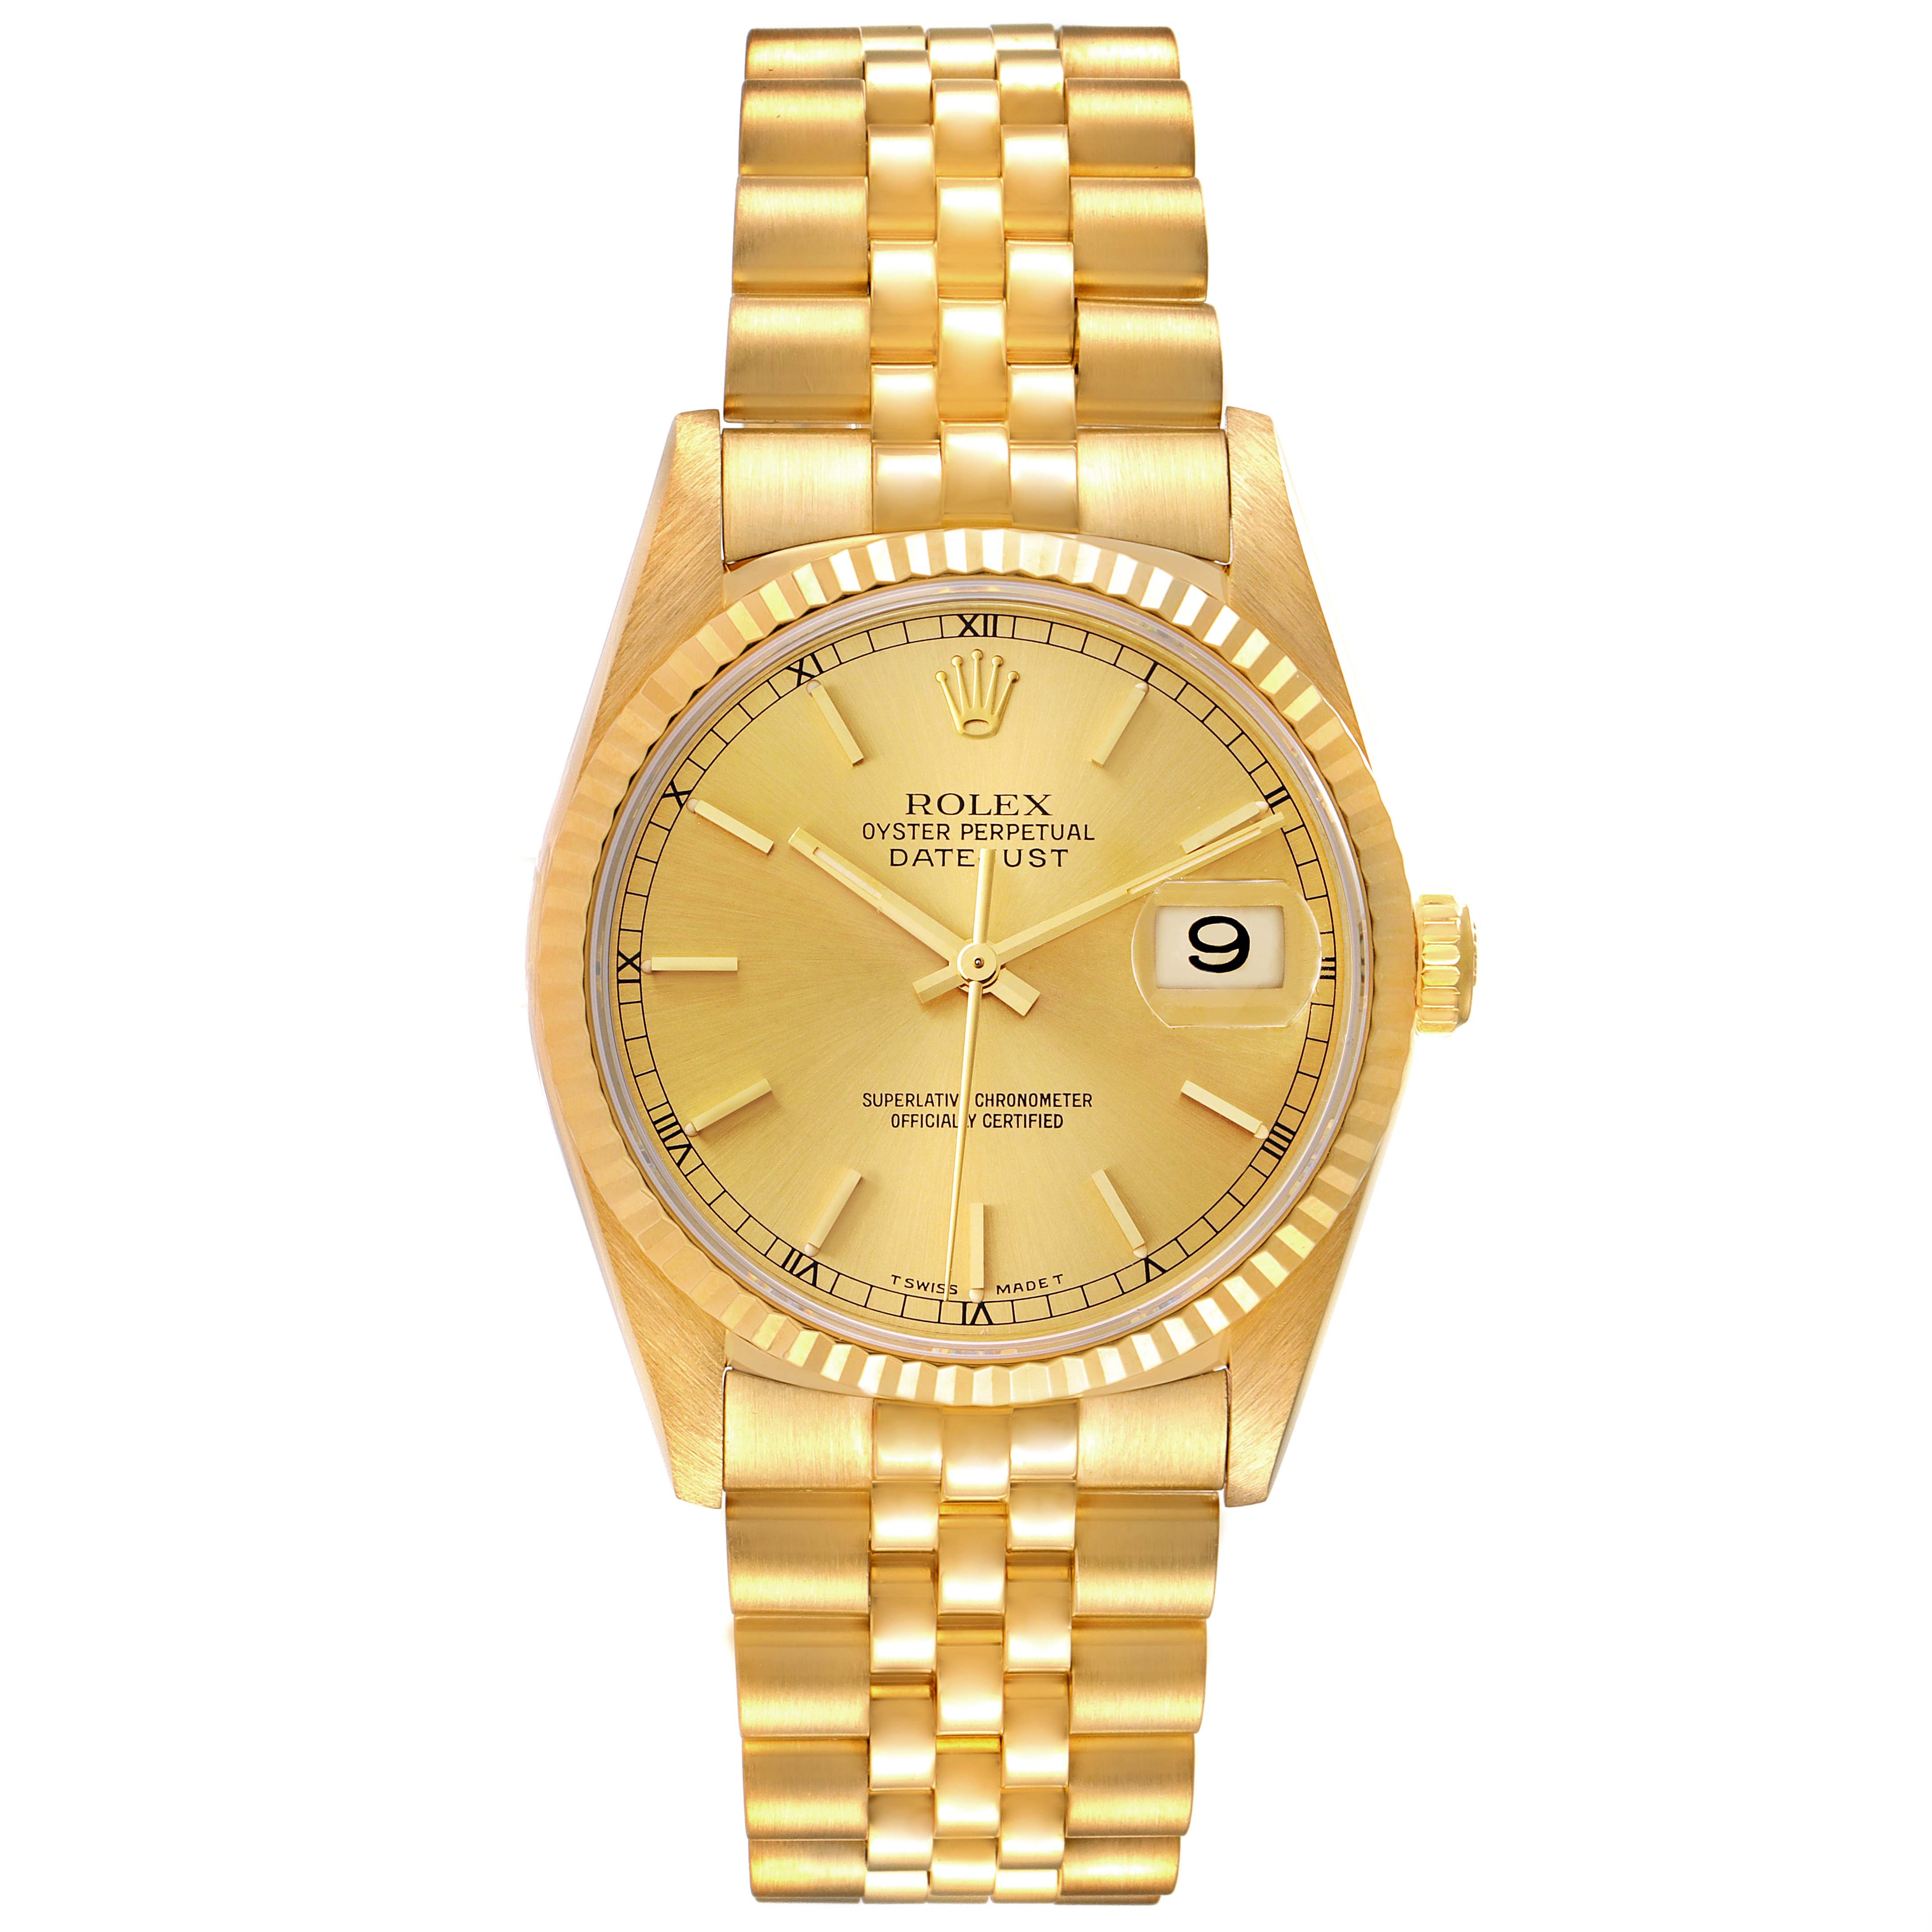 Rolex Datejust 18k Yellow Gold Champagne Dial Mens Watch 16238 Box ...